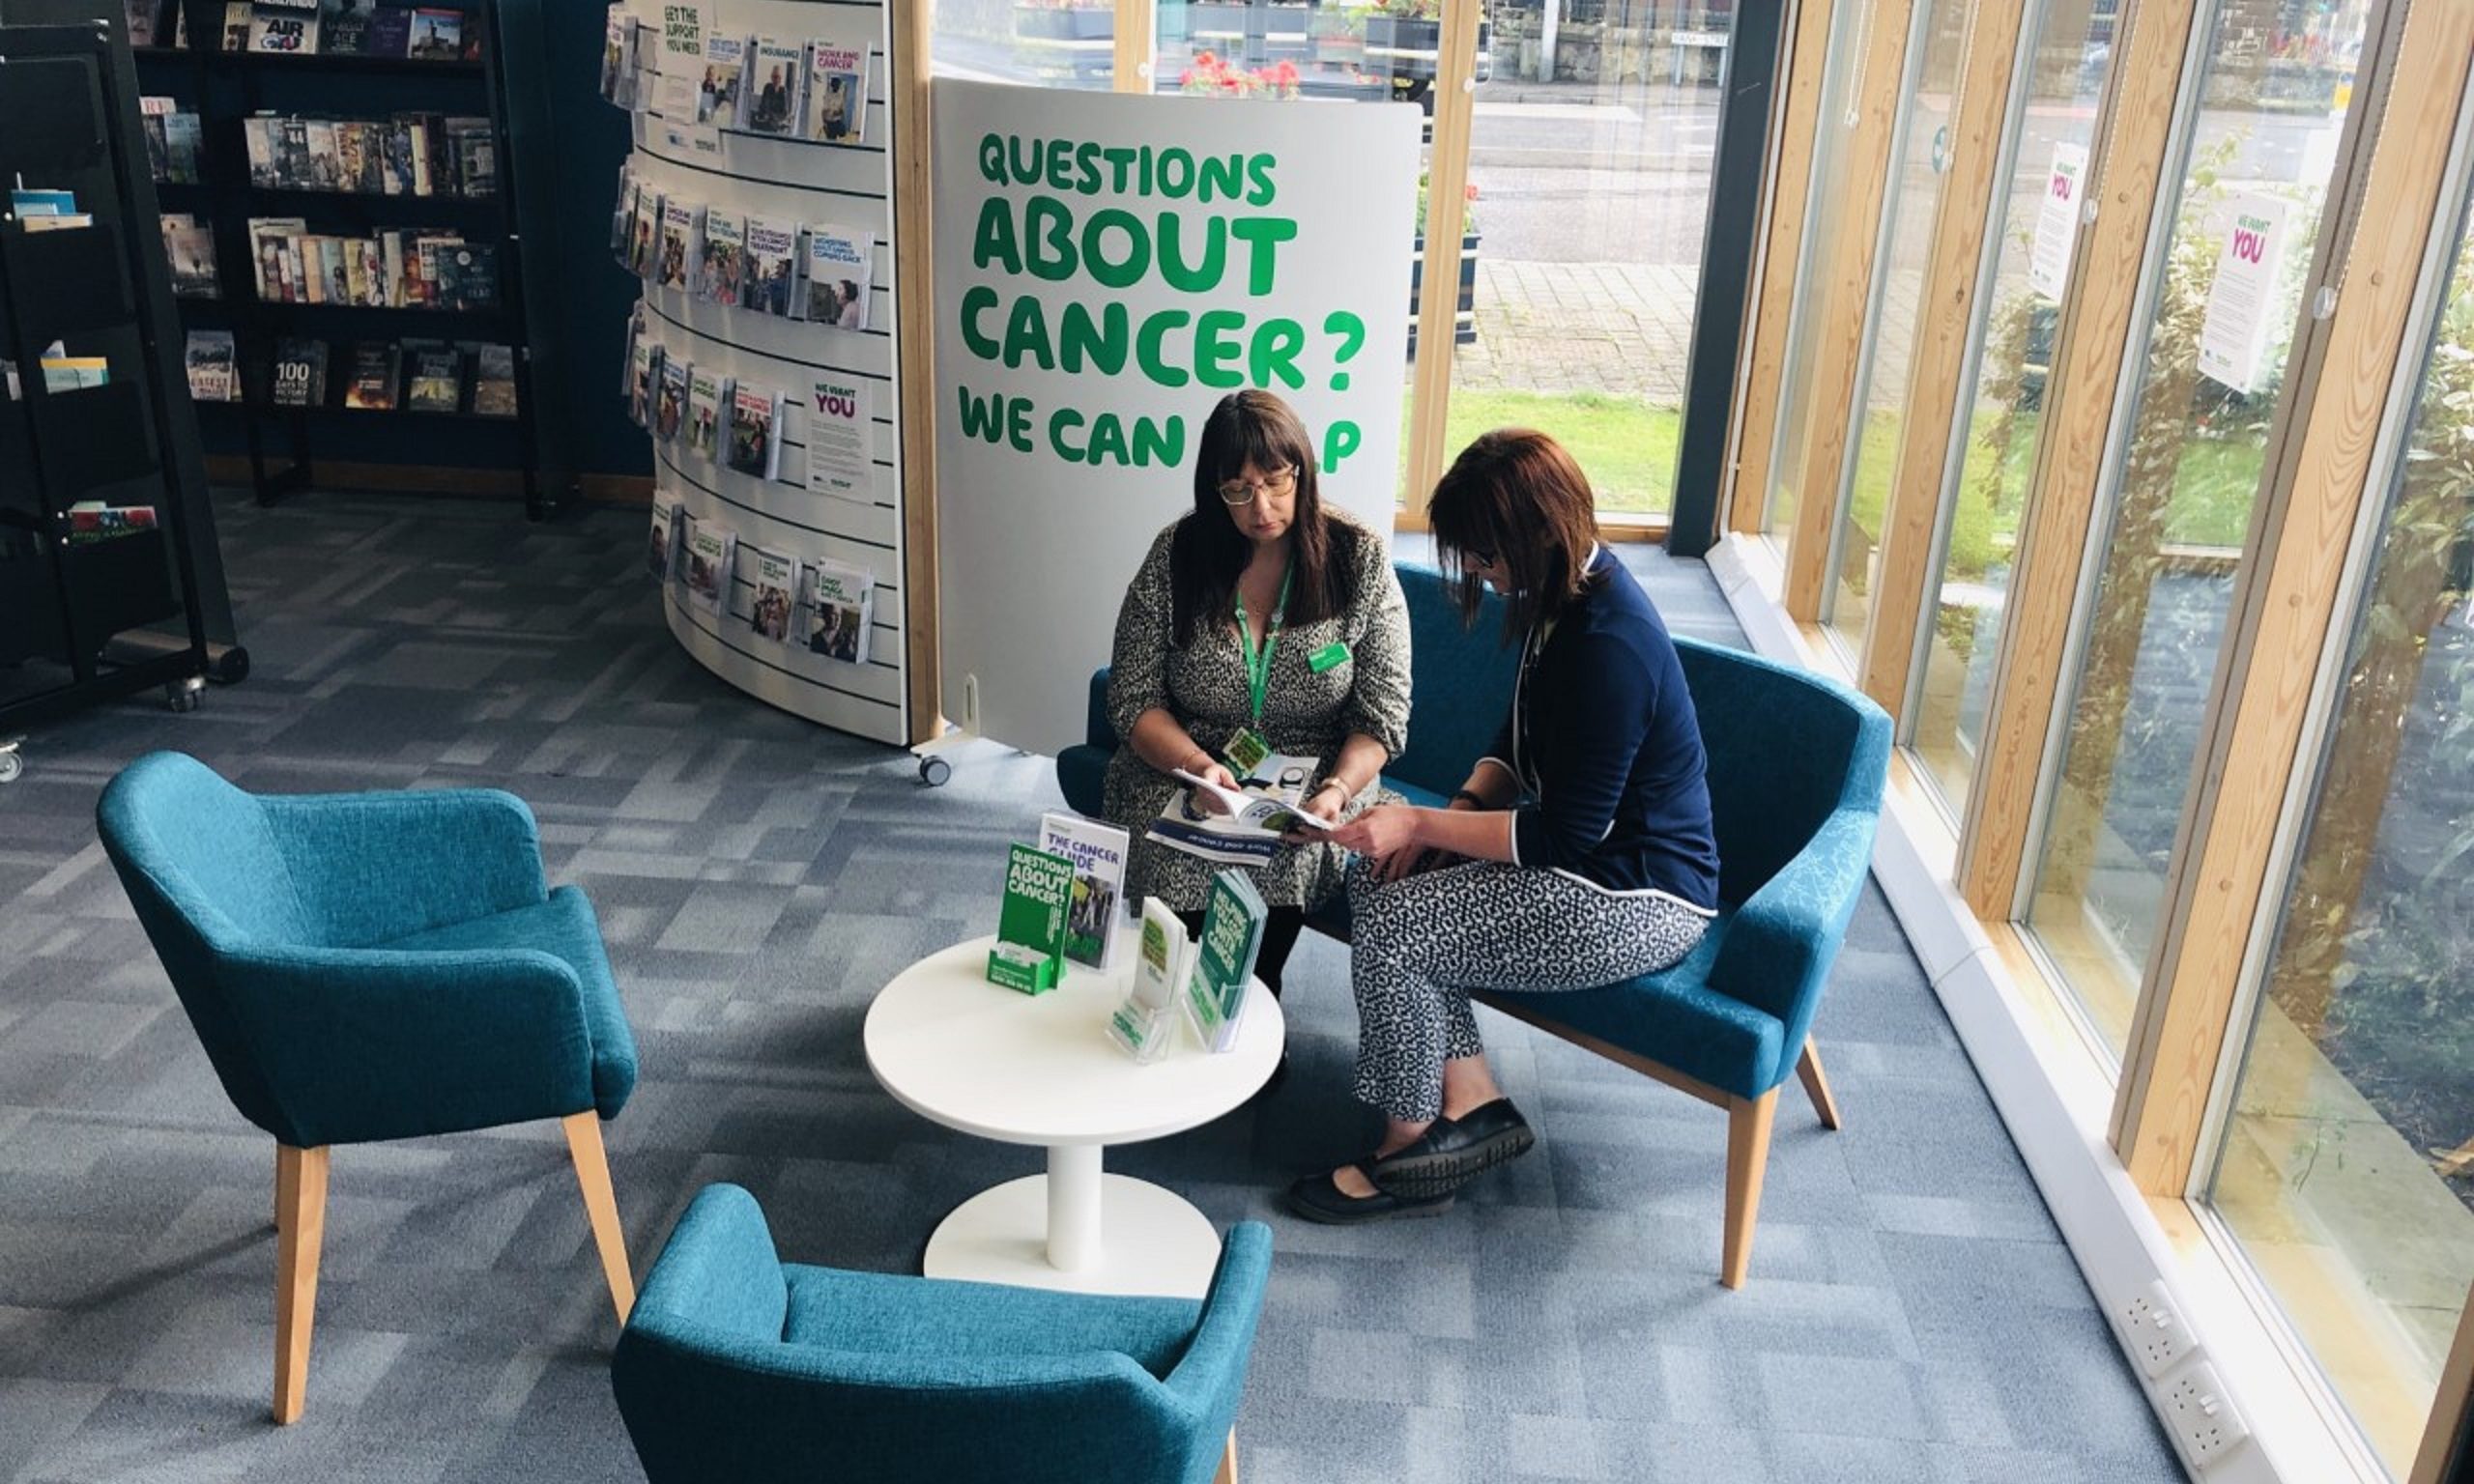 Jackie Brown, Macmillan volunteer co-ordinator at ONFife Libraries, left, with Carolyn Johnston, facilities and service supervisor at Lochgelly Centre, in the Macmillan space at Lochgelly Centre.